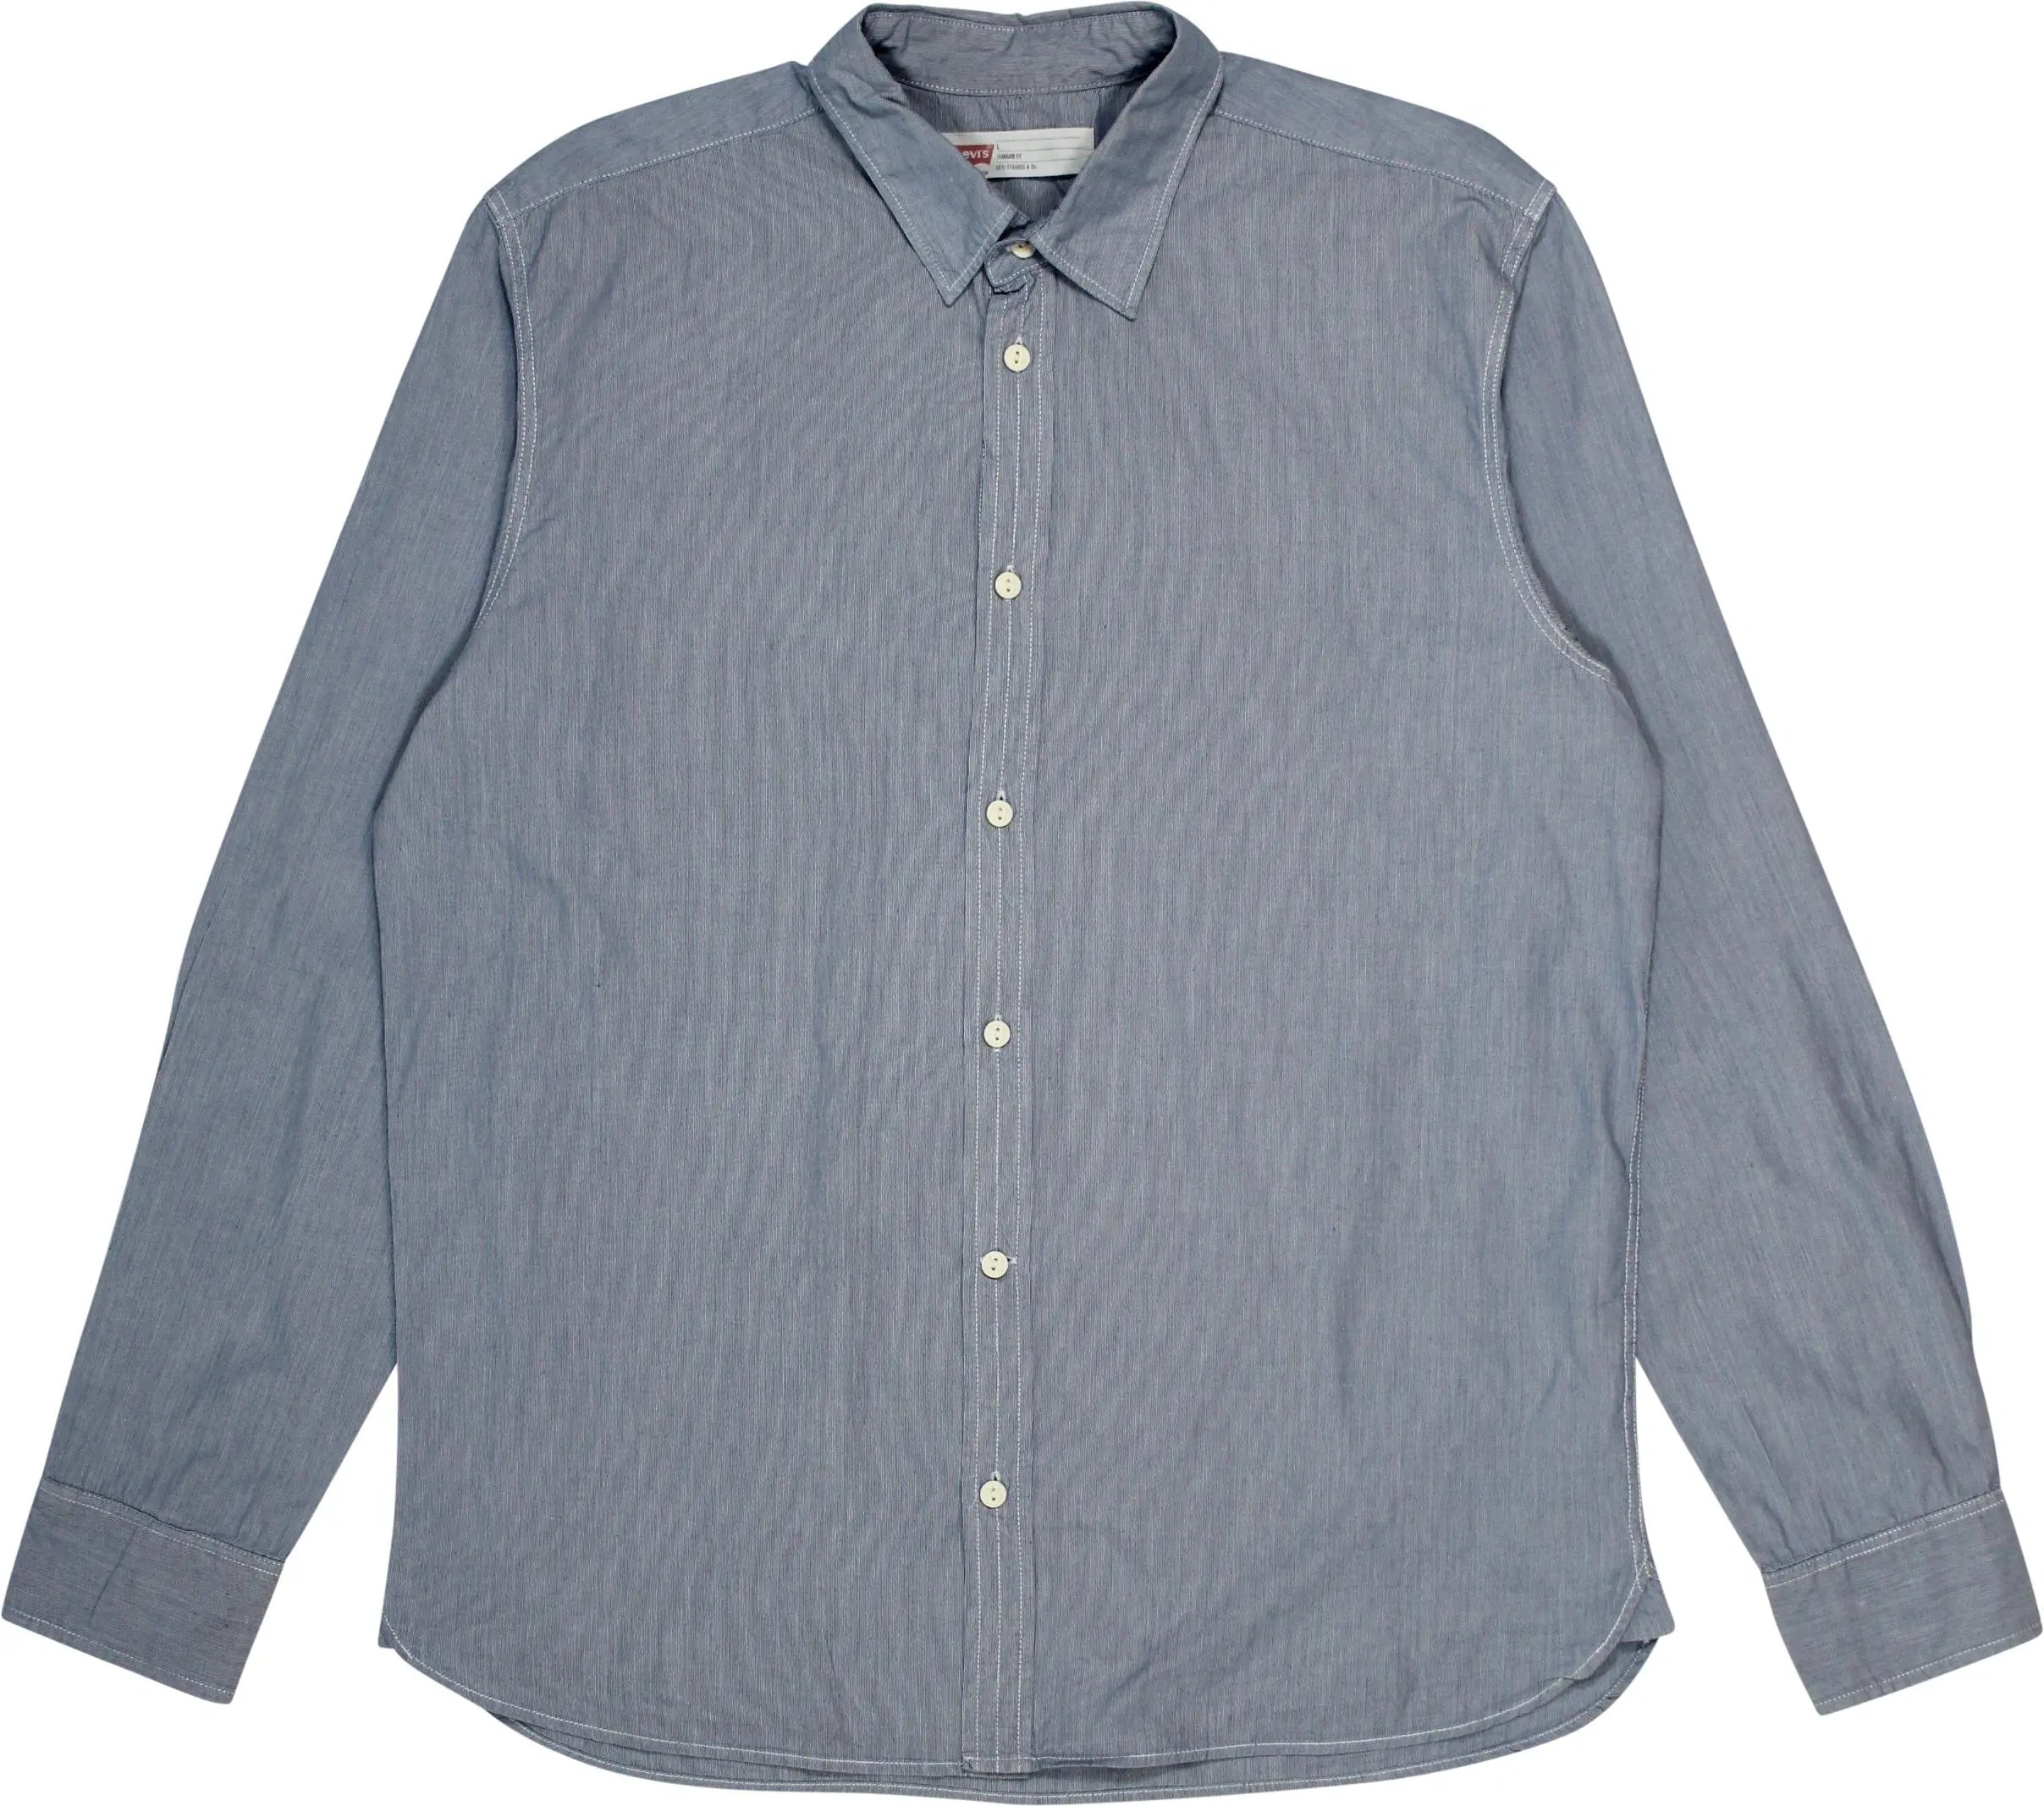 Levi's - Blue Shirt by Levi's- ThriftTale.com - Vintage and second handclothing